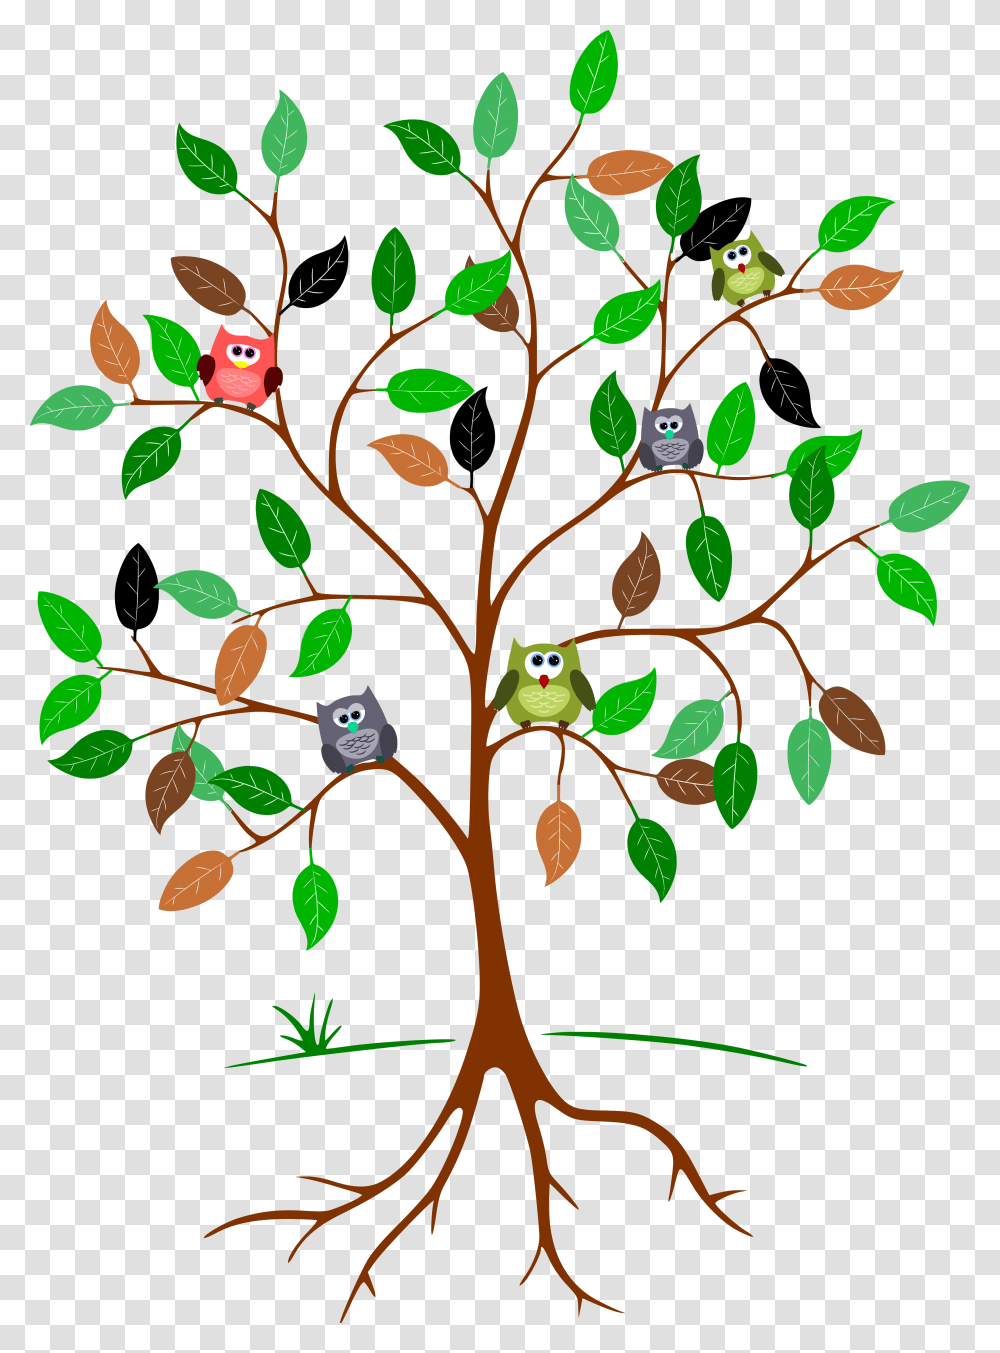 Owls In A Tree Clip Arts Tree With Roots And Leaves, Plant, Leaf, Bird, Animal Transparent Png